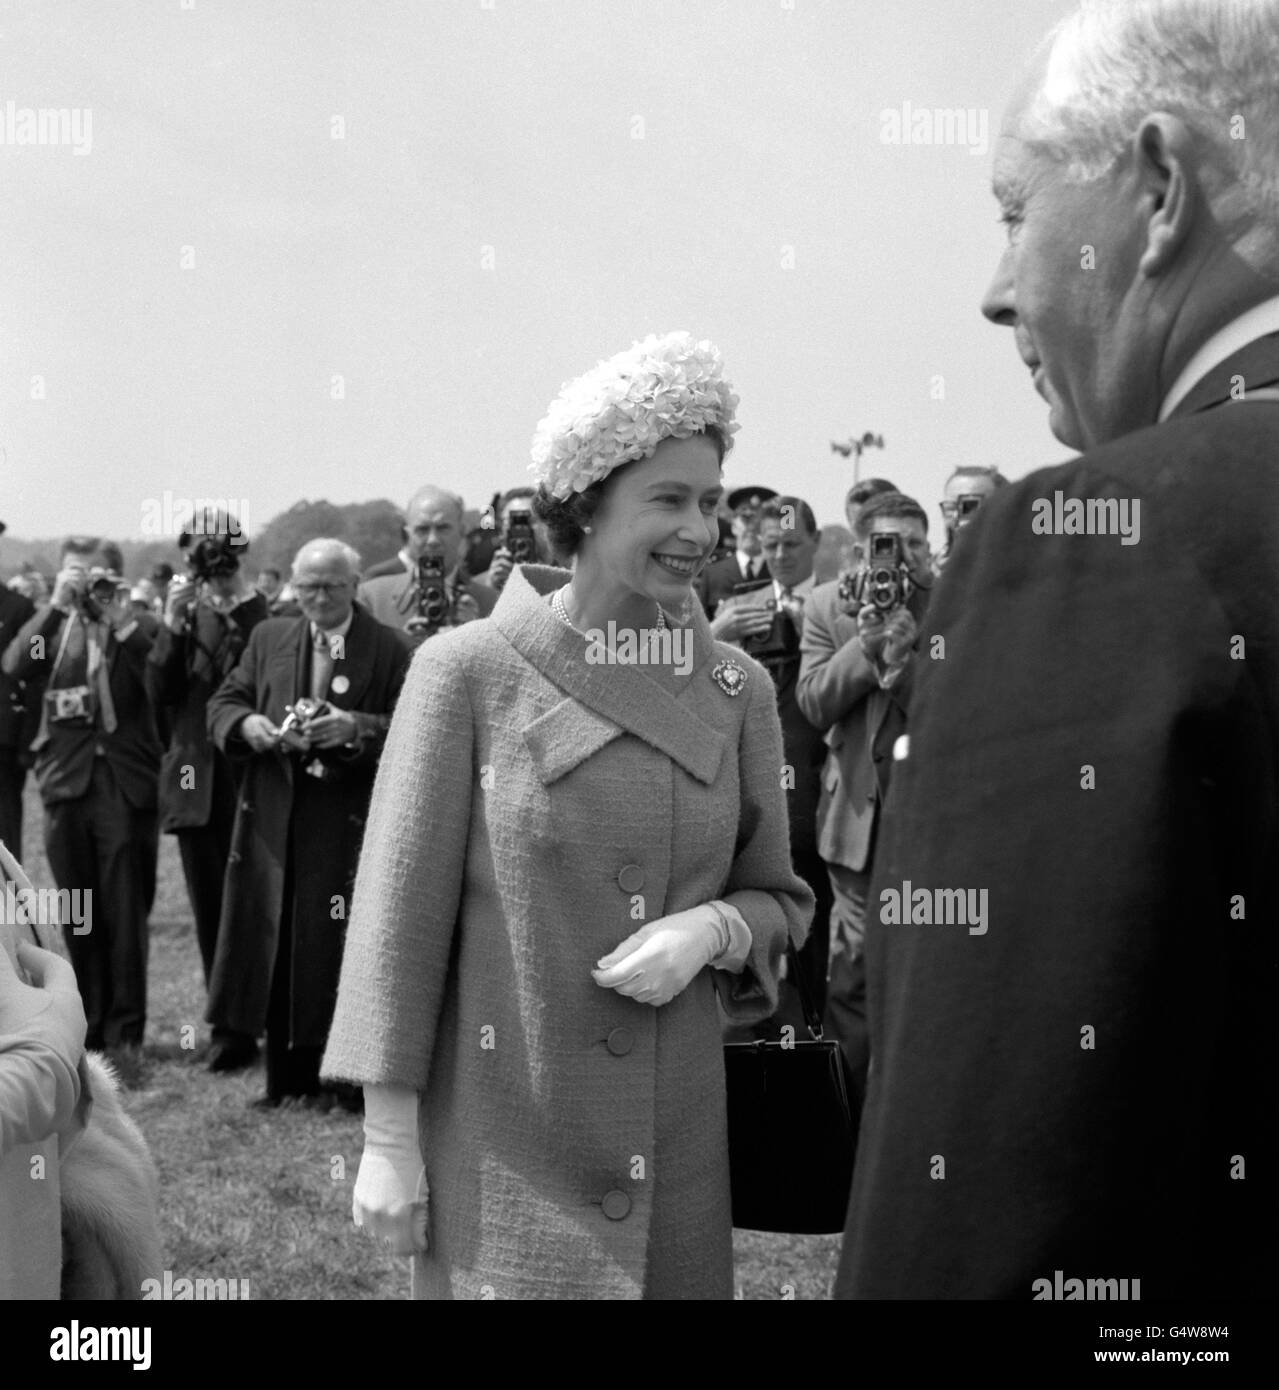 Horse Racing - The Derby Stakes - Epsom Racecourse. Queen Elizabeth II at the Epsom Derby, where she saw the 66-1 outsider Psidium win the big race. Stock Photo